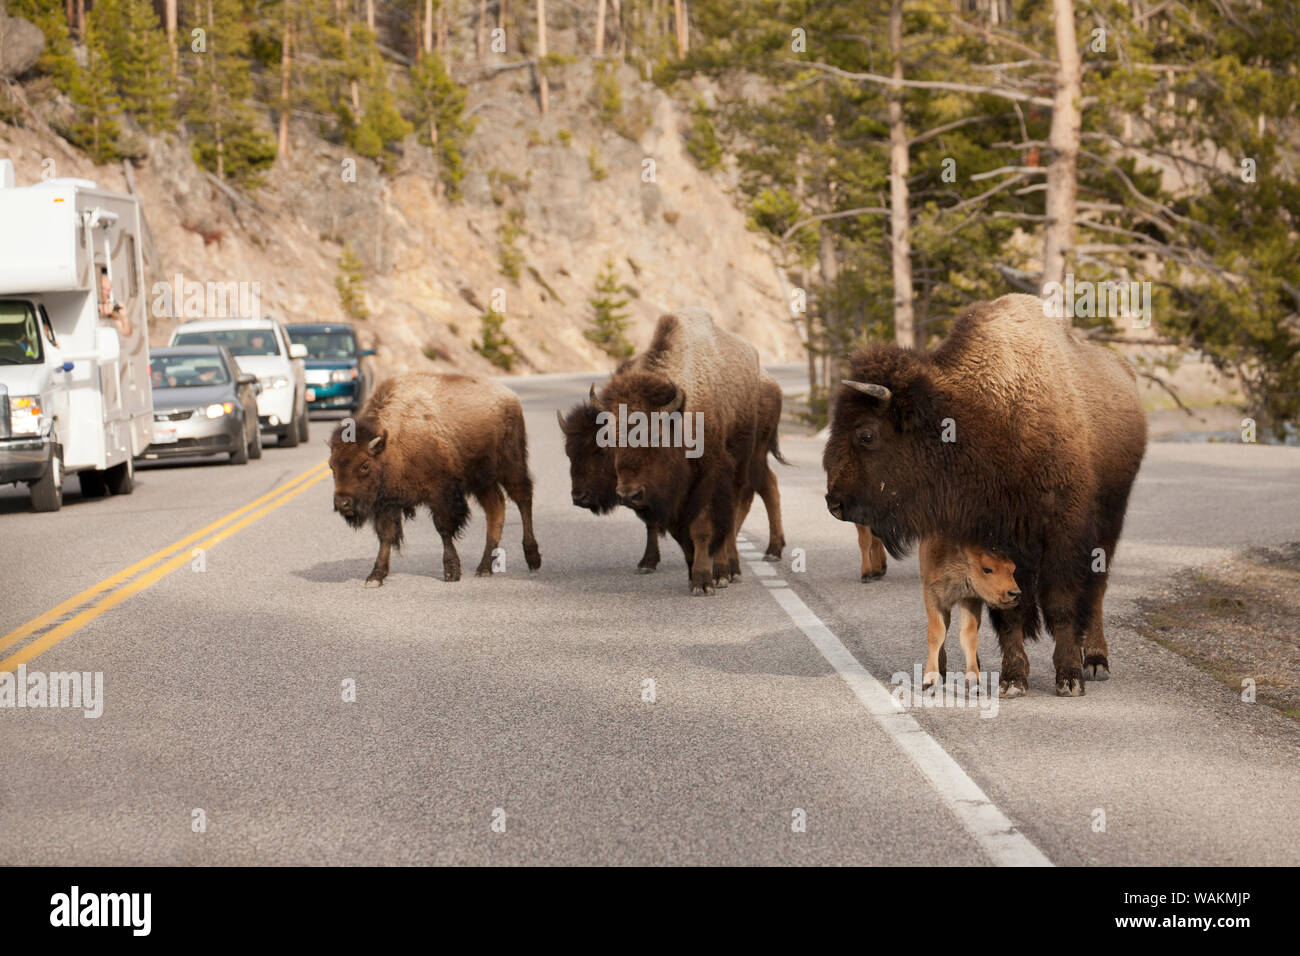 Yellowstone National Park, Wyoming, USA. Bison walking down the middle of the road, next to cars. Stock Photo